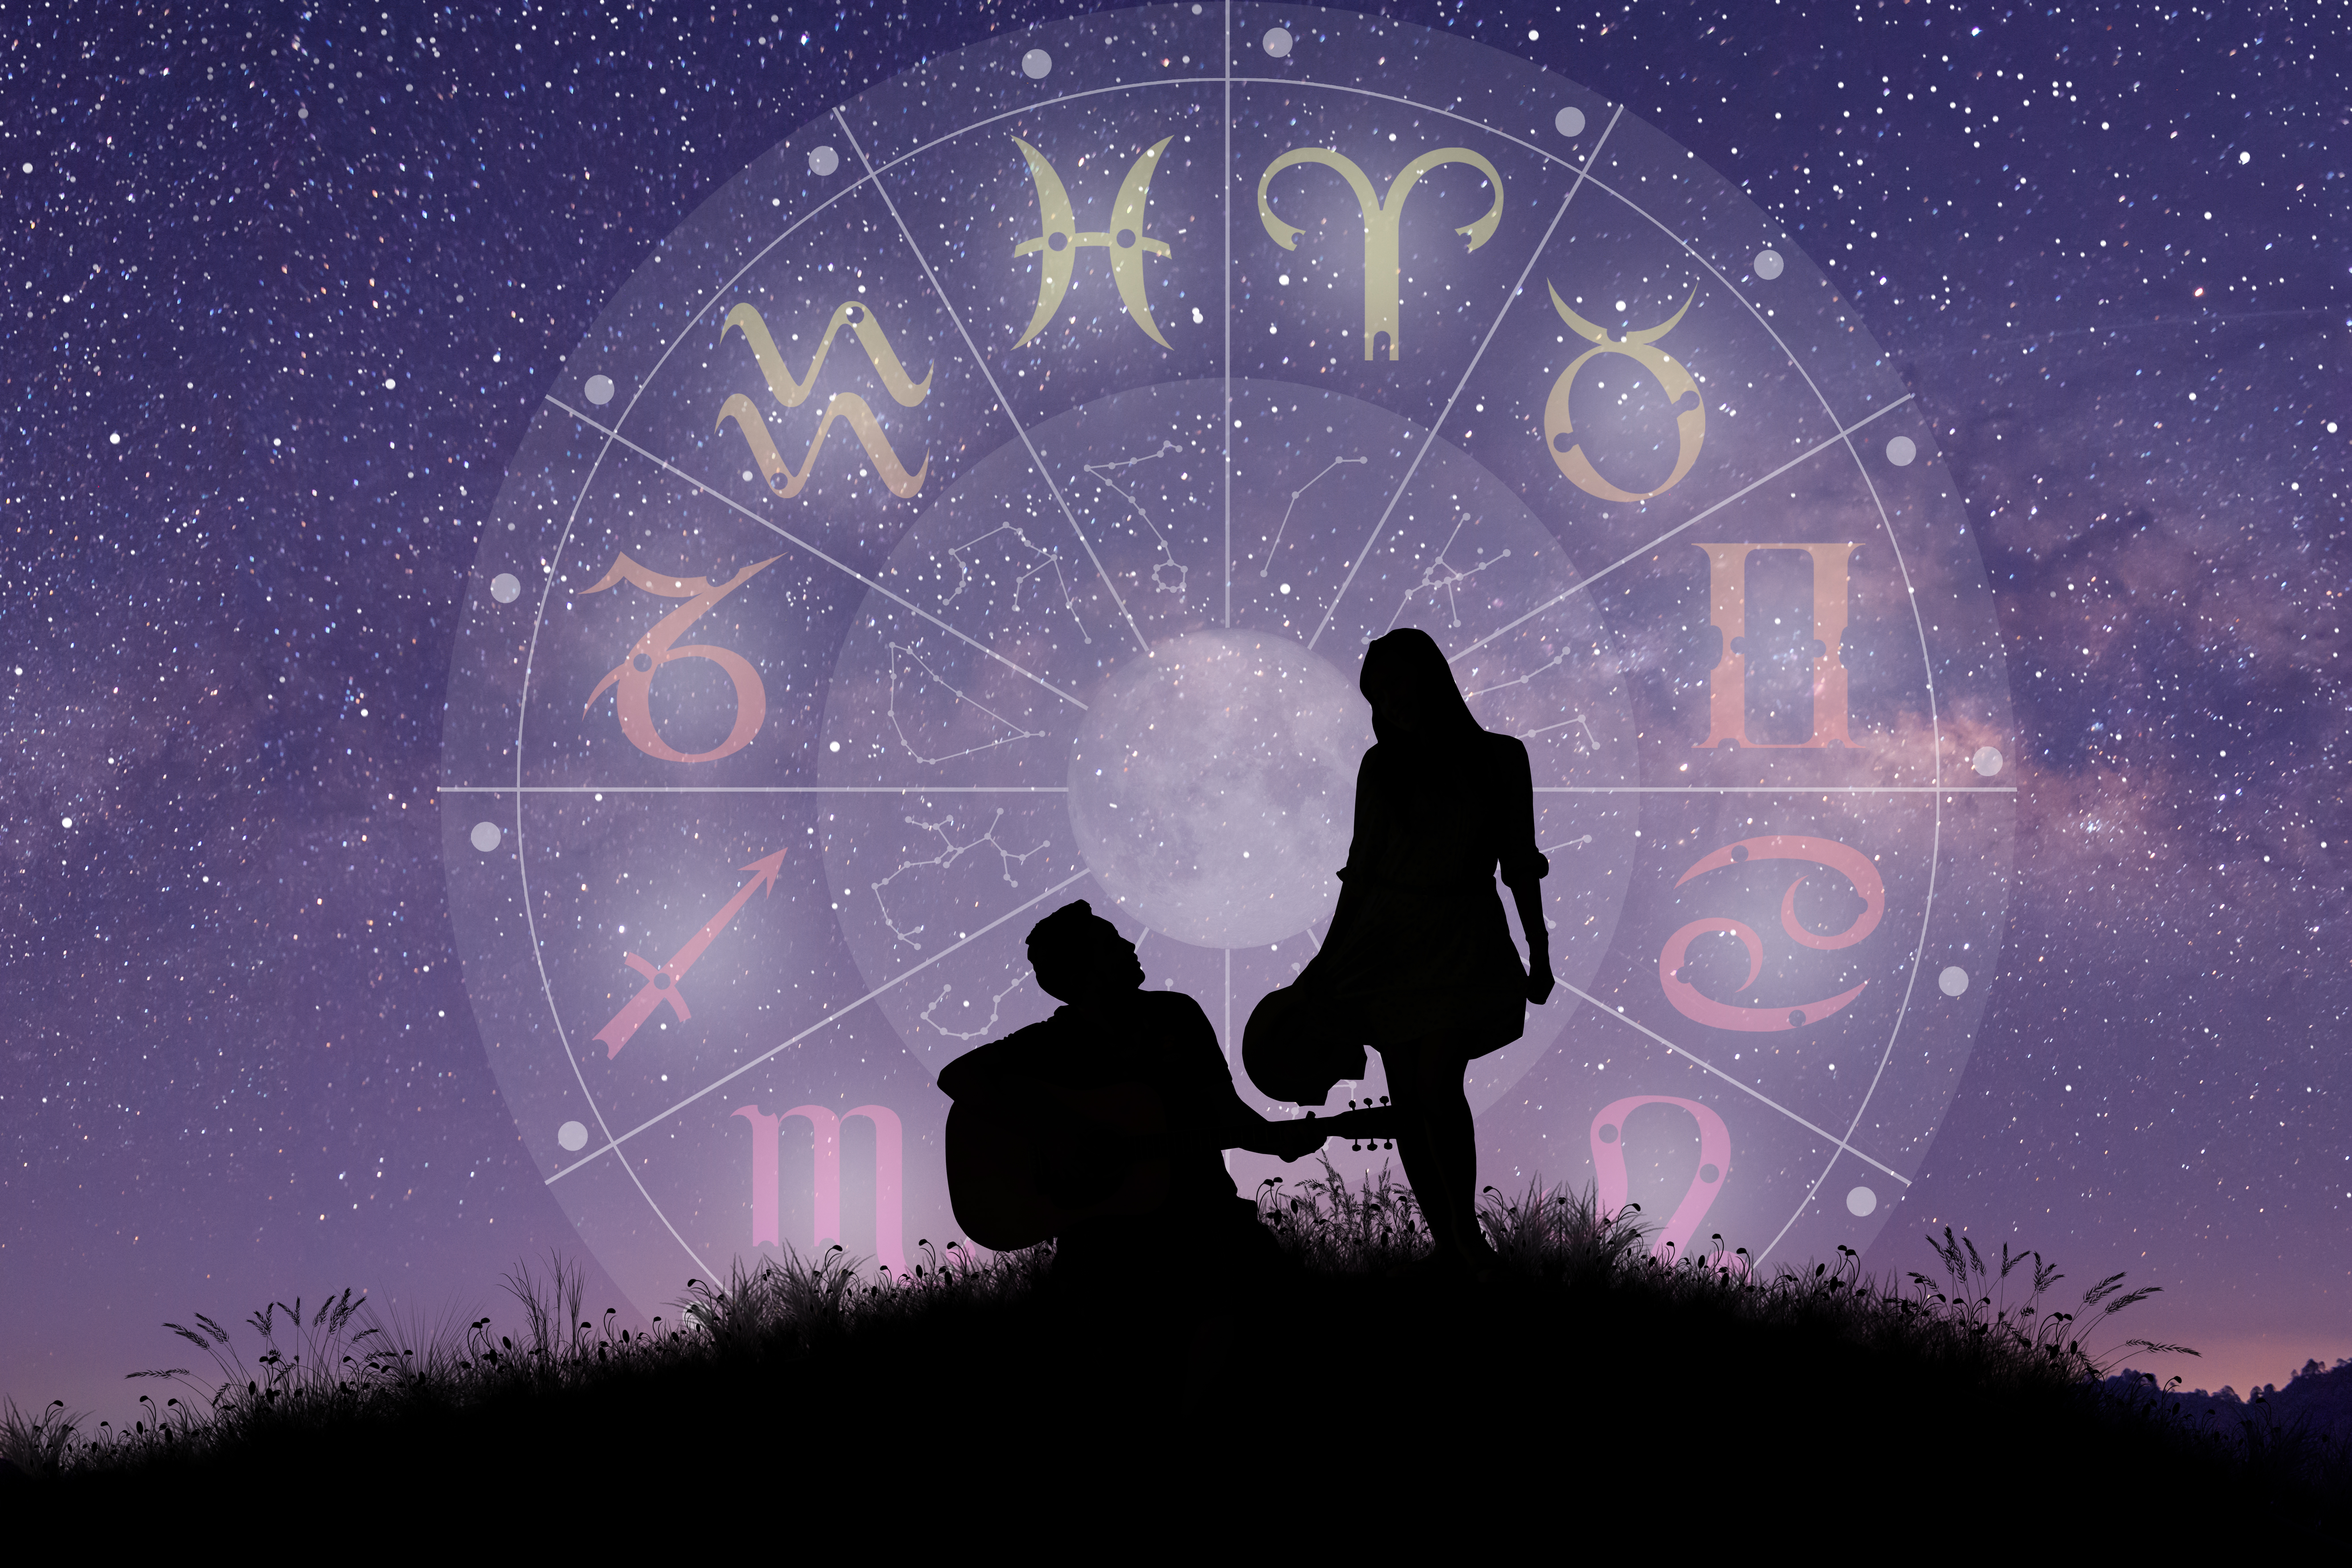 A photo of a couple spending quality time together and zodiac wheel | Source: Shutterstock